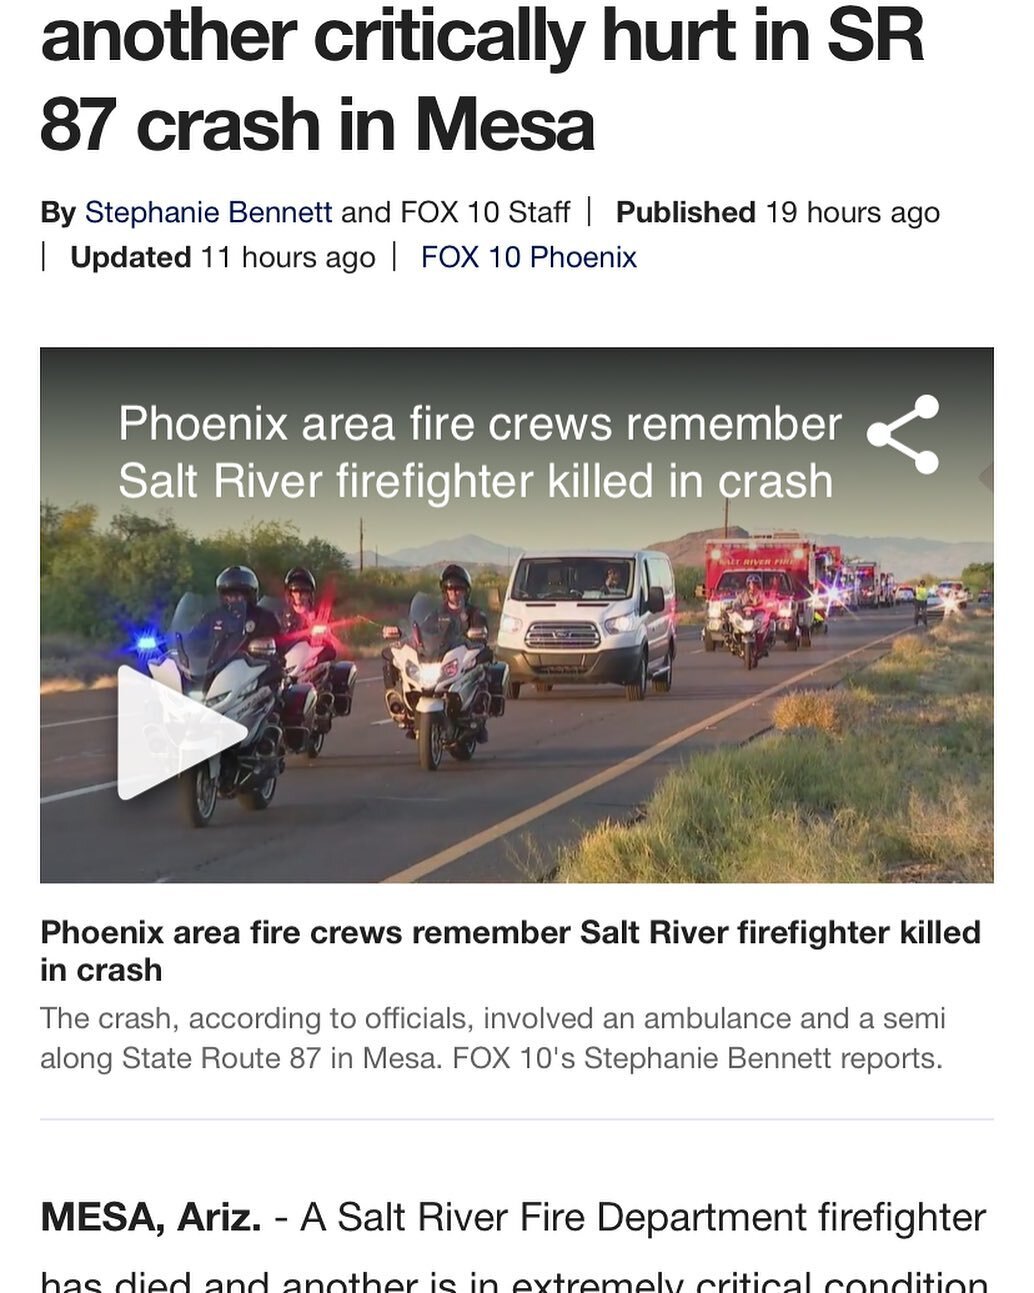 A tragedy, and one we see all too often. Roadway safety is under prioritized in modern legislature and road design. Keep yourself safe on these roads.